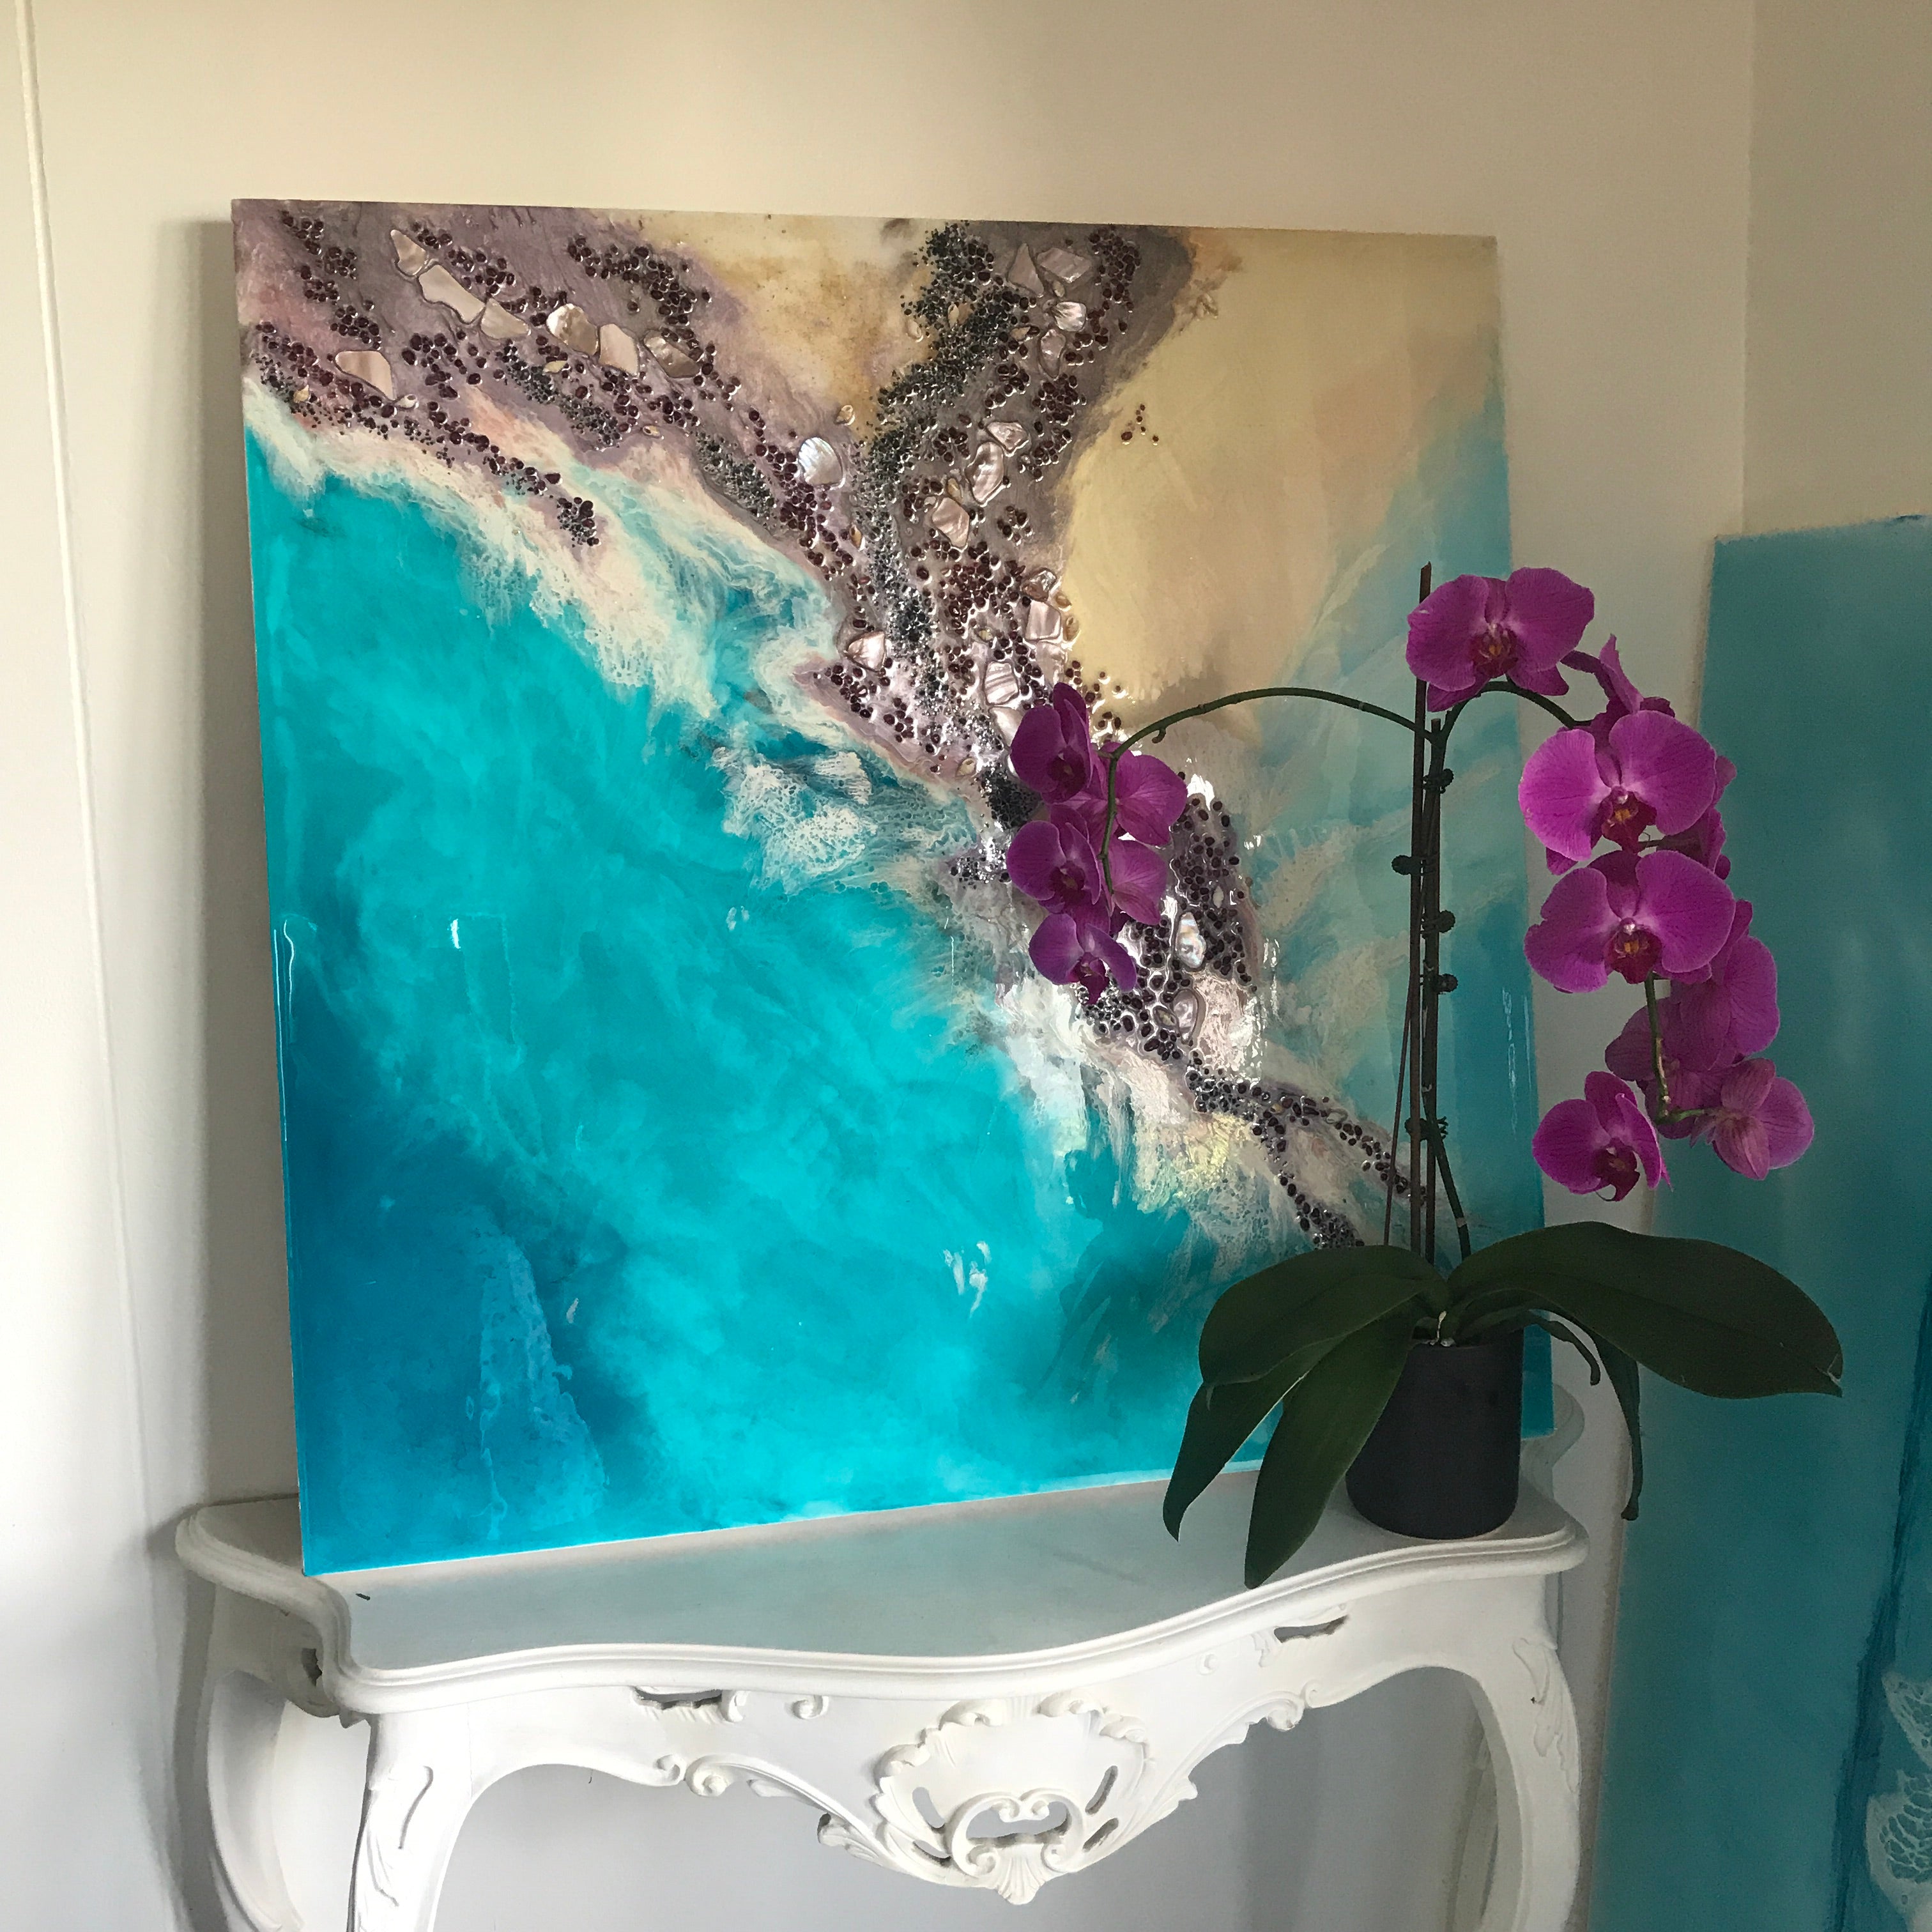 Teal Blue Ocean Wave. Byron Bay Magic. Original Artwork. Antuanelle 11 Magic with Mussels and Garnet. Abstract Seascape 90x90cm